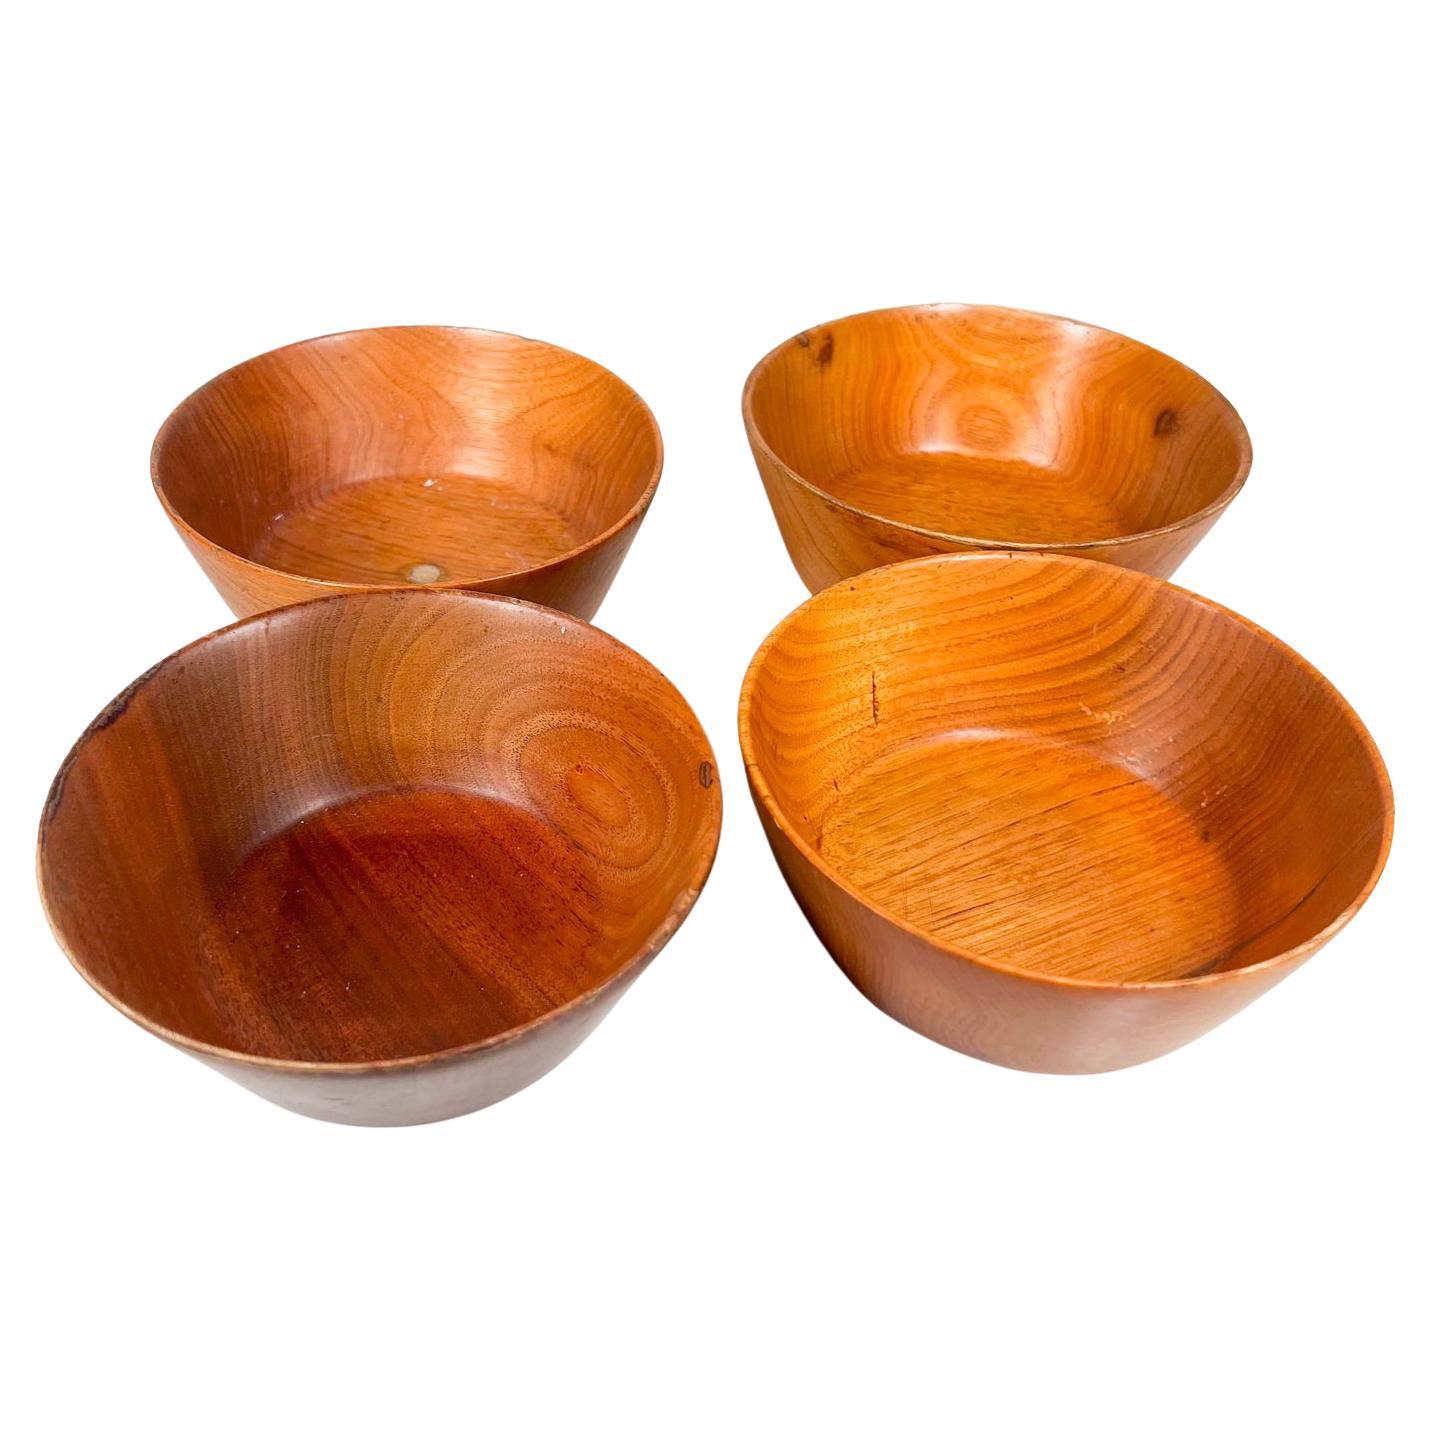 1960s American Studio Craft Hand-Carved Wood Bowl Set by Harry Nohr